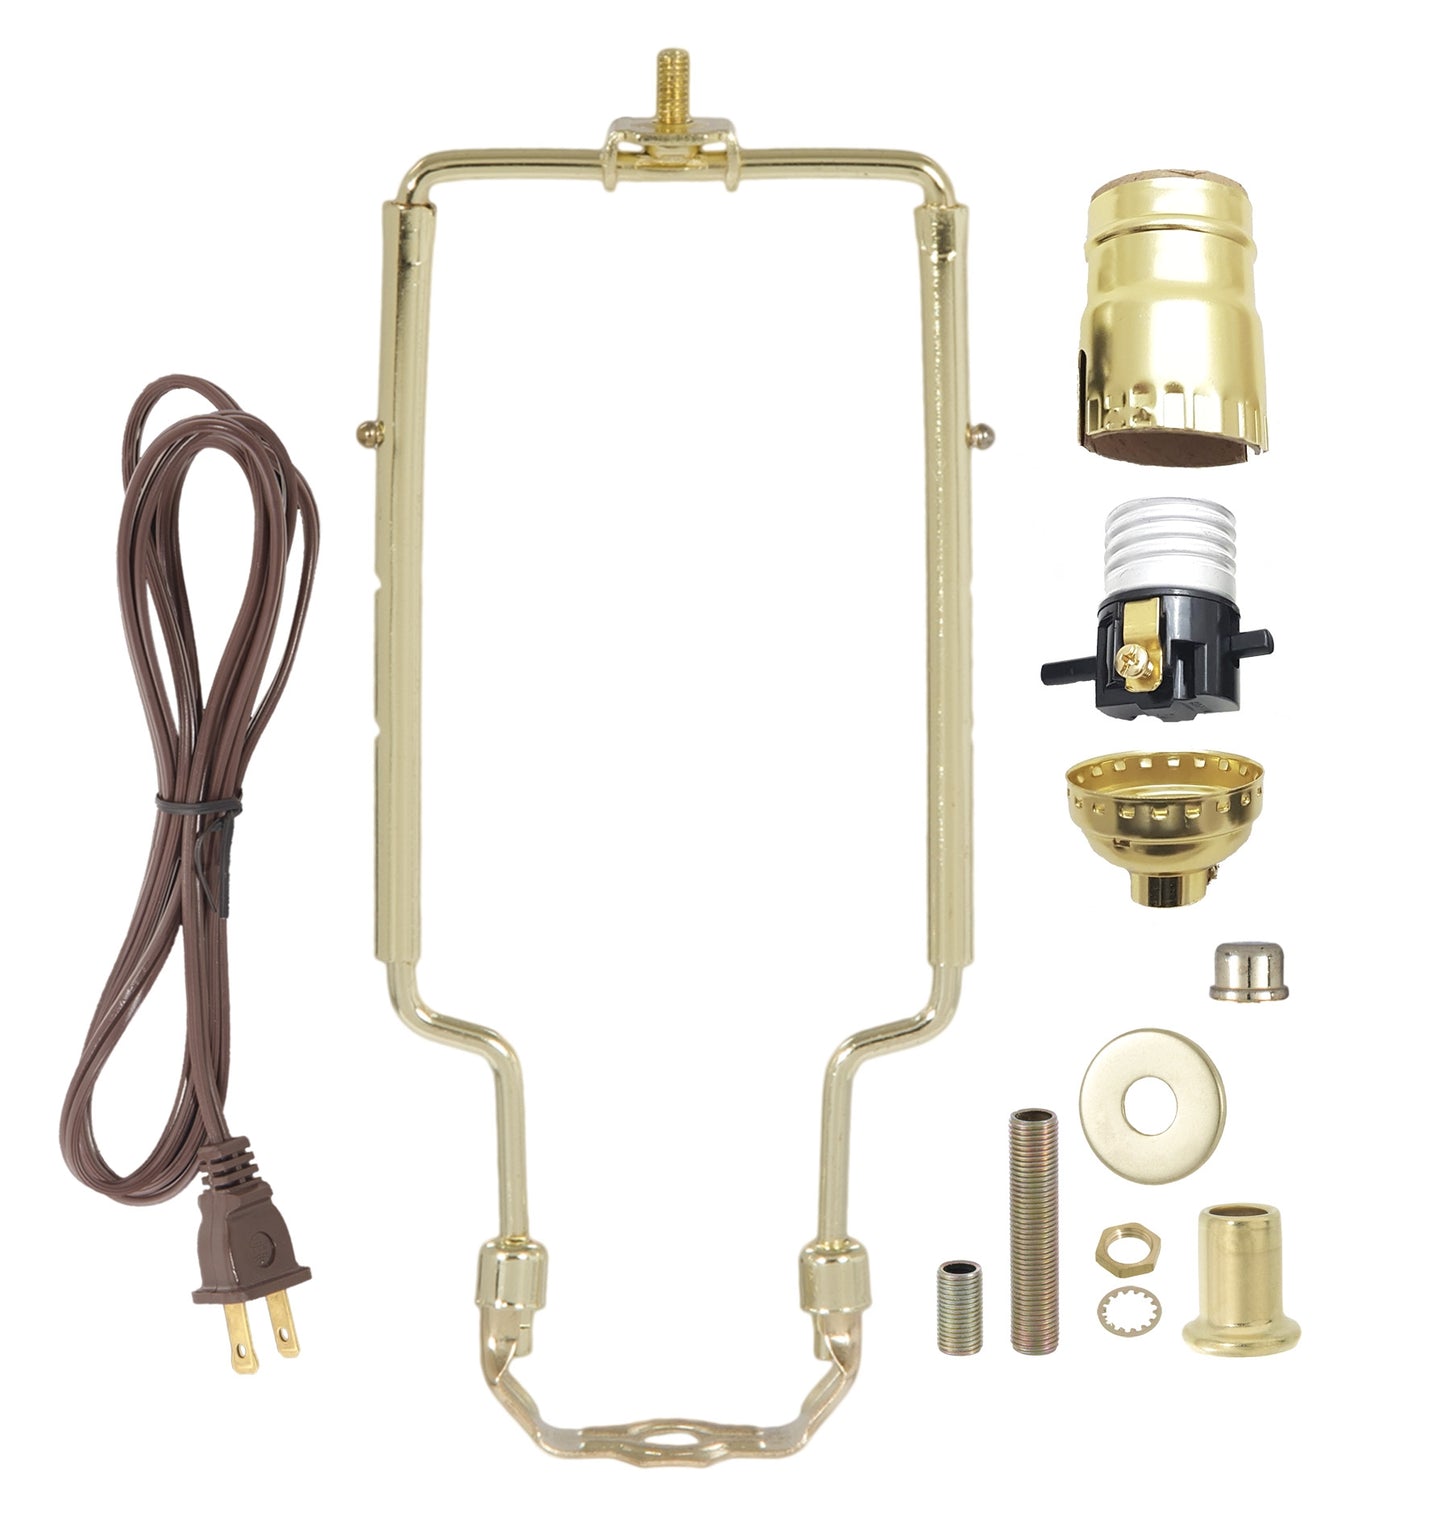 Table Lamp Wiring Kit with Push-Thru Socket, Adjustable Harp, and Brass Plated Finish